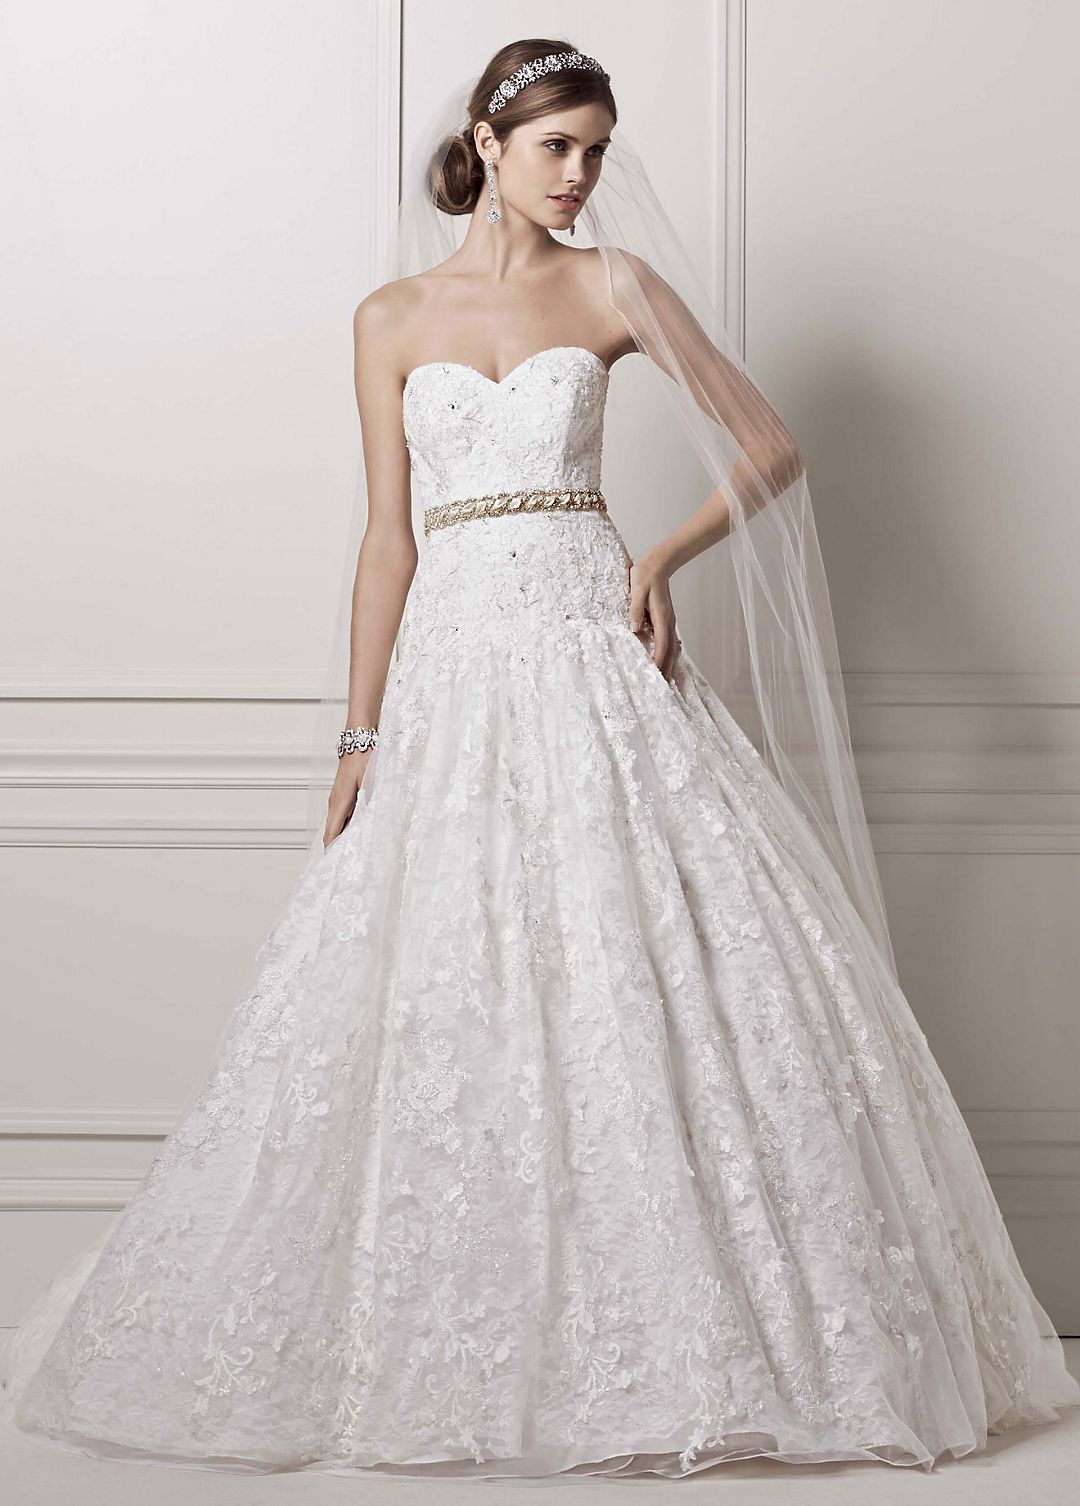 Strapless Ball Gown with All Over Lace Appliques Image 1